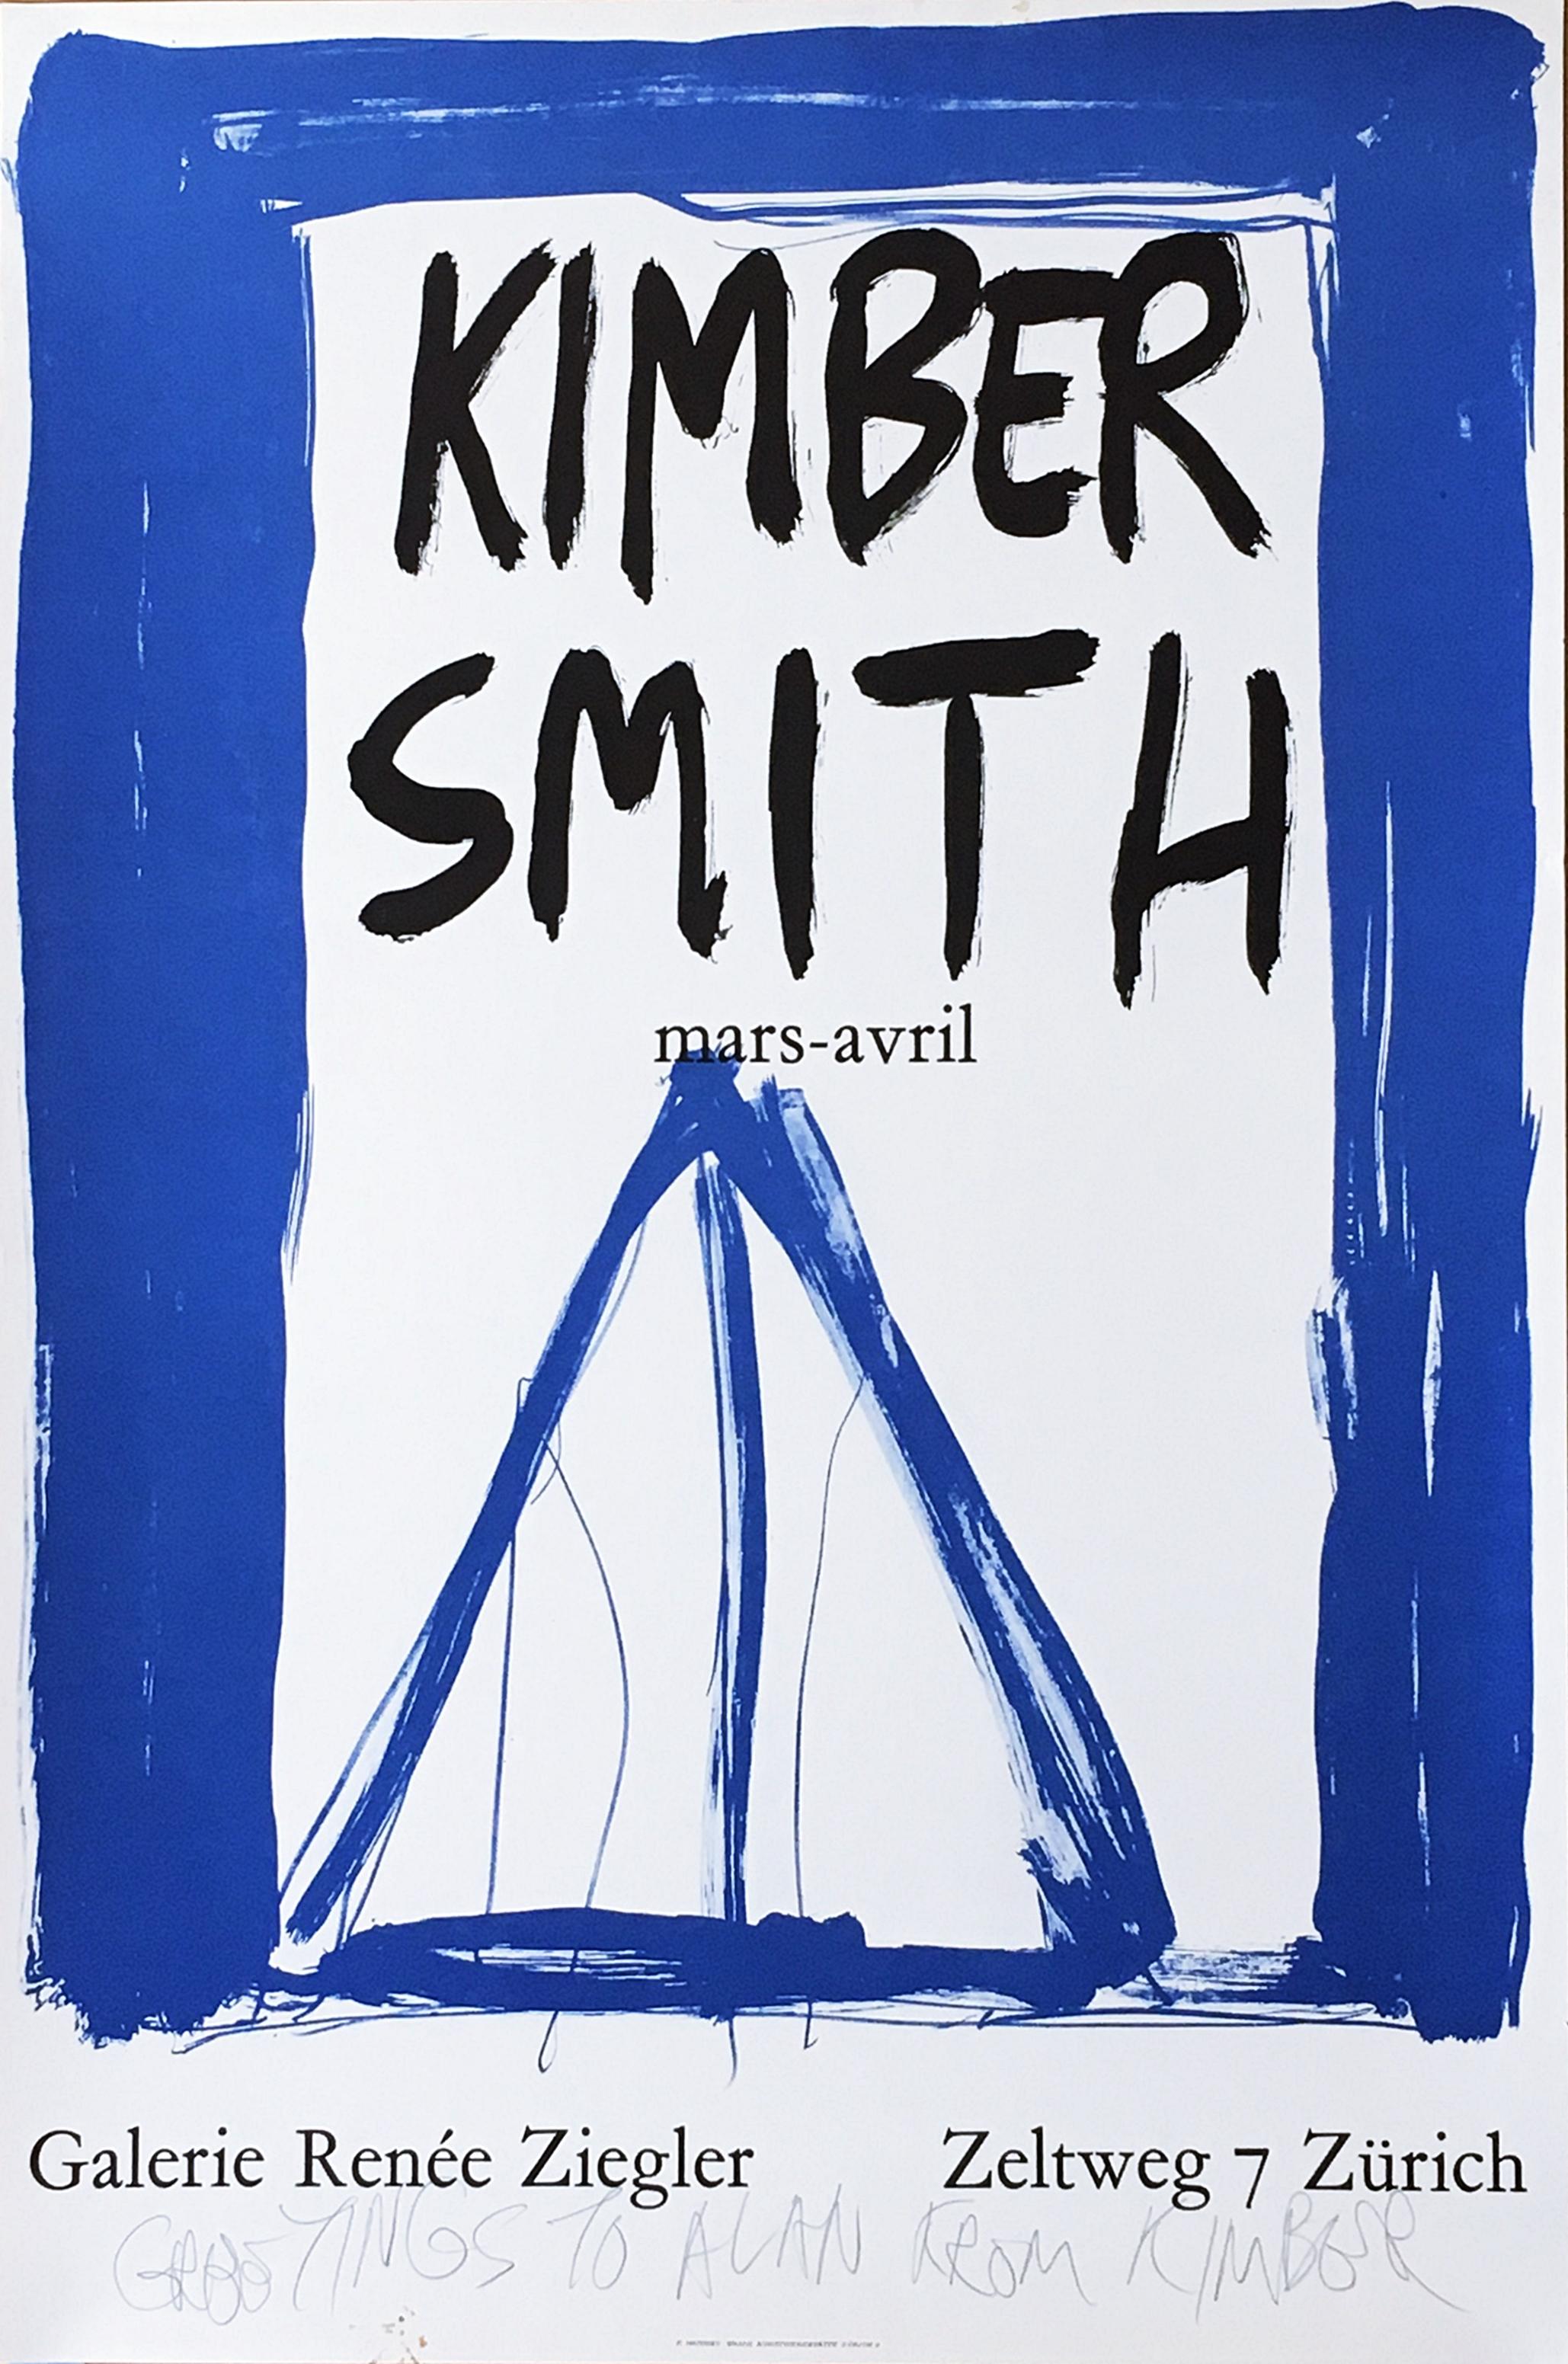 Kimber Smith (Hand signed and inscribed), ca. 1974
Offset Lithograph Poster. Hand Signed. Inscribed. 
Hand signed and inscribed on lower recto (front). Inscription reads: "Greetings to Alan from Kimber"
22 3/8 × 14 7/8 inches
Unframed
Kimber Smith